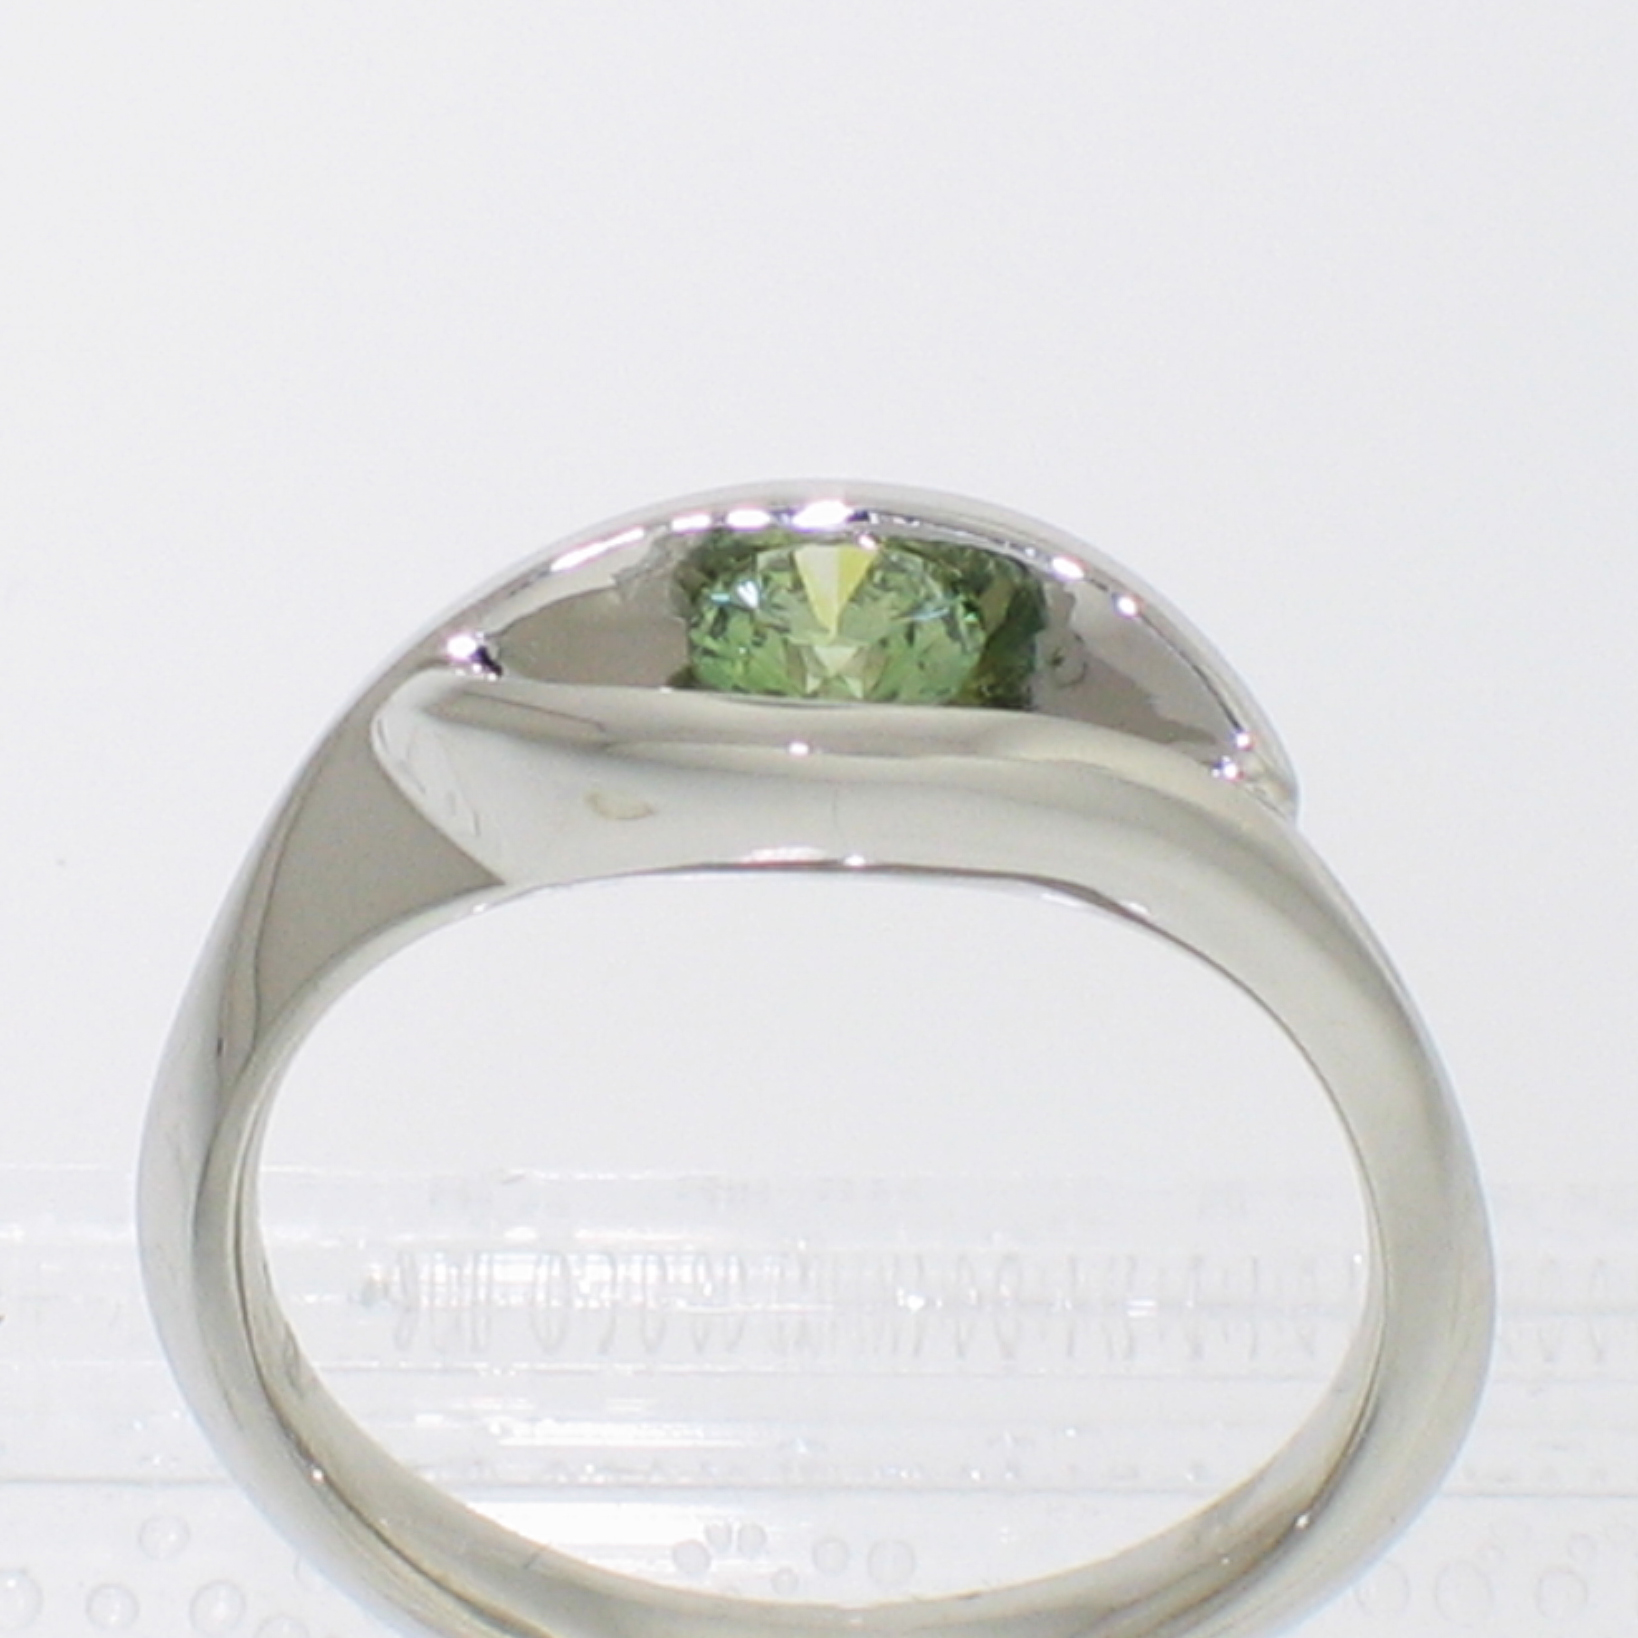 Platinum wrap-around v-shaped channel ring with channel-set iradiated green round brilliant diamond (alternate view)